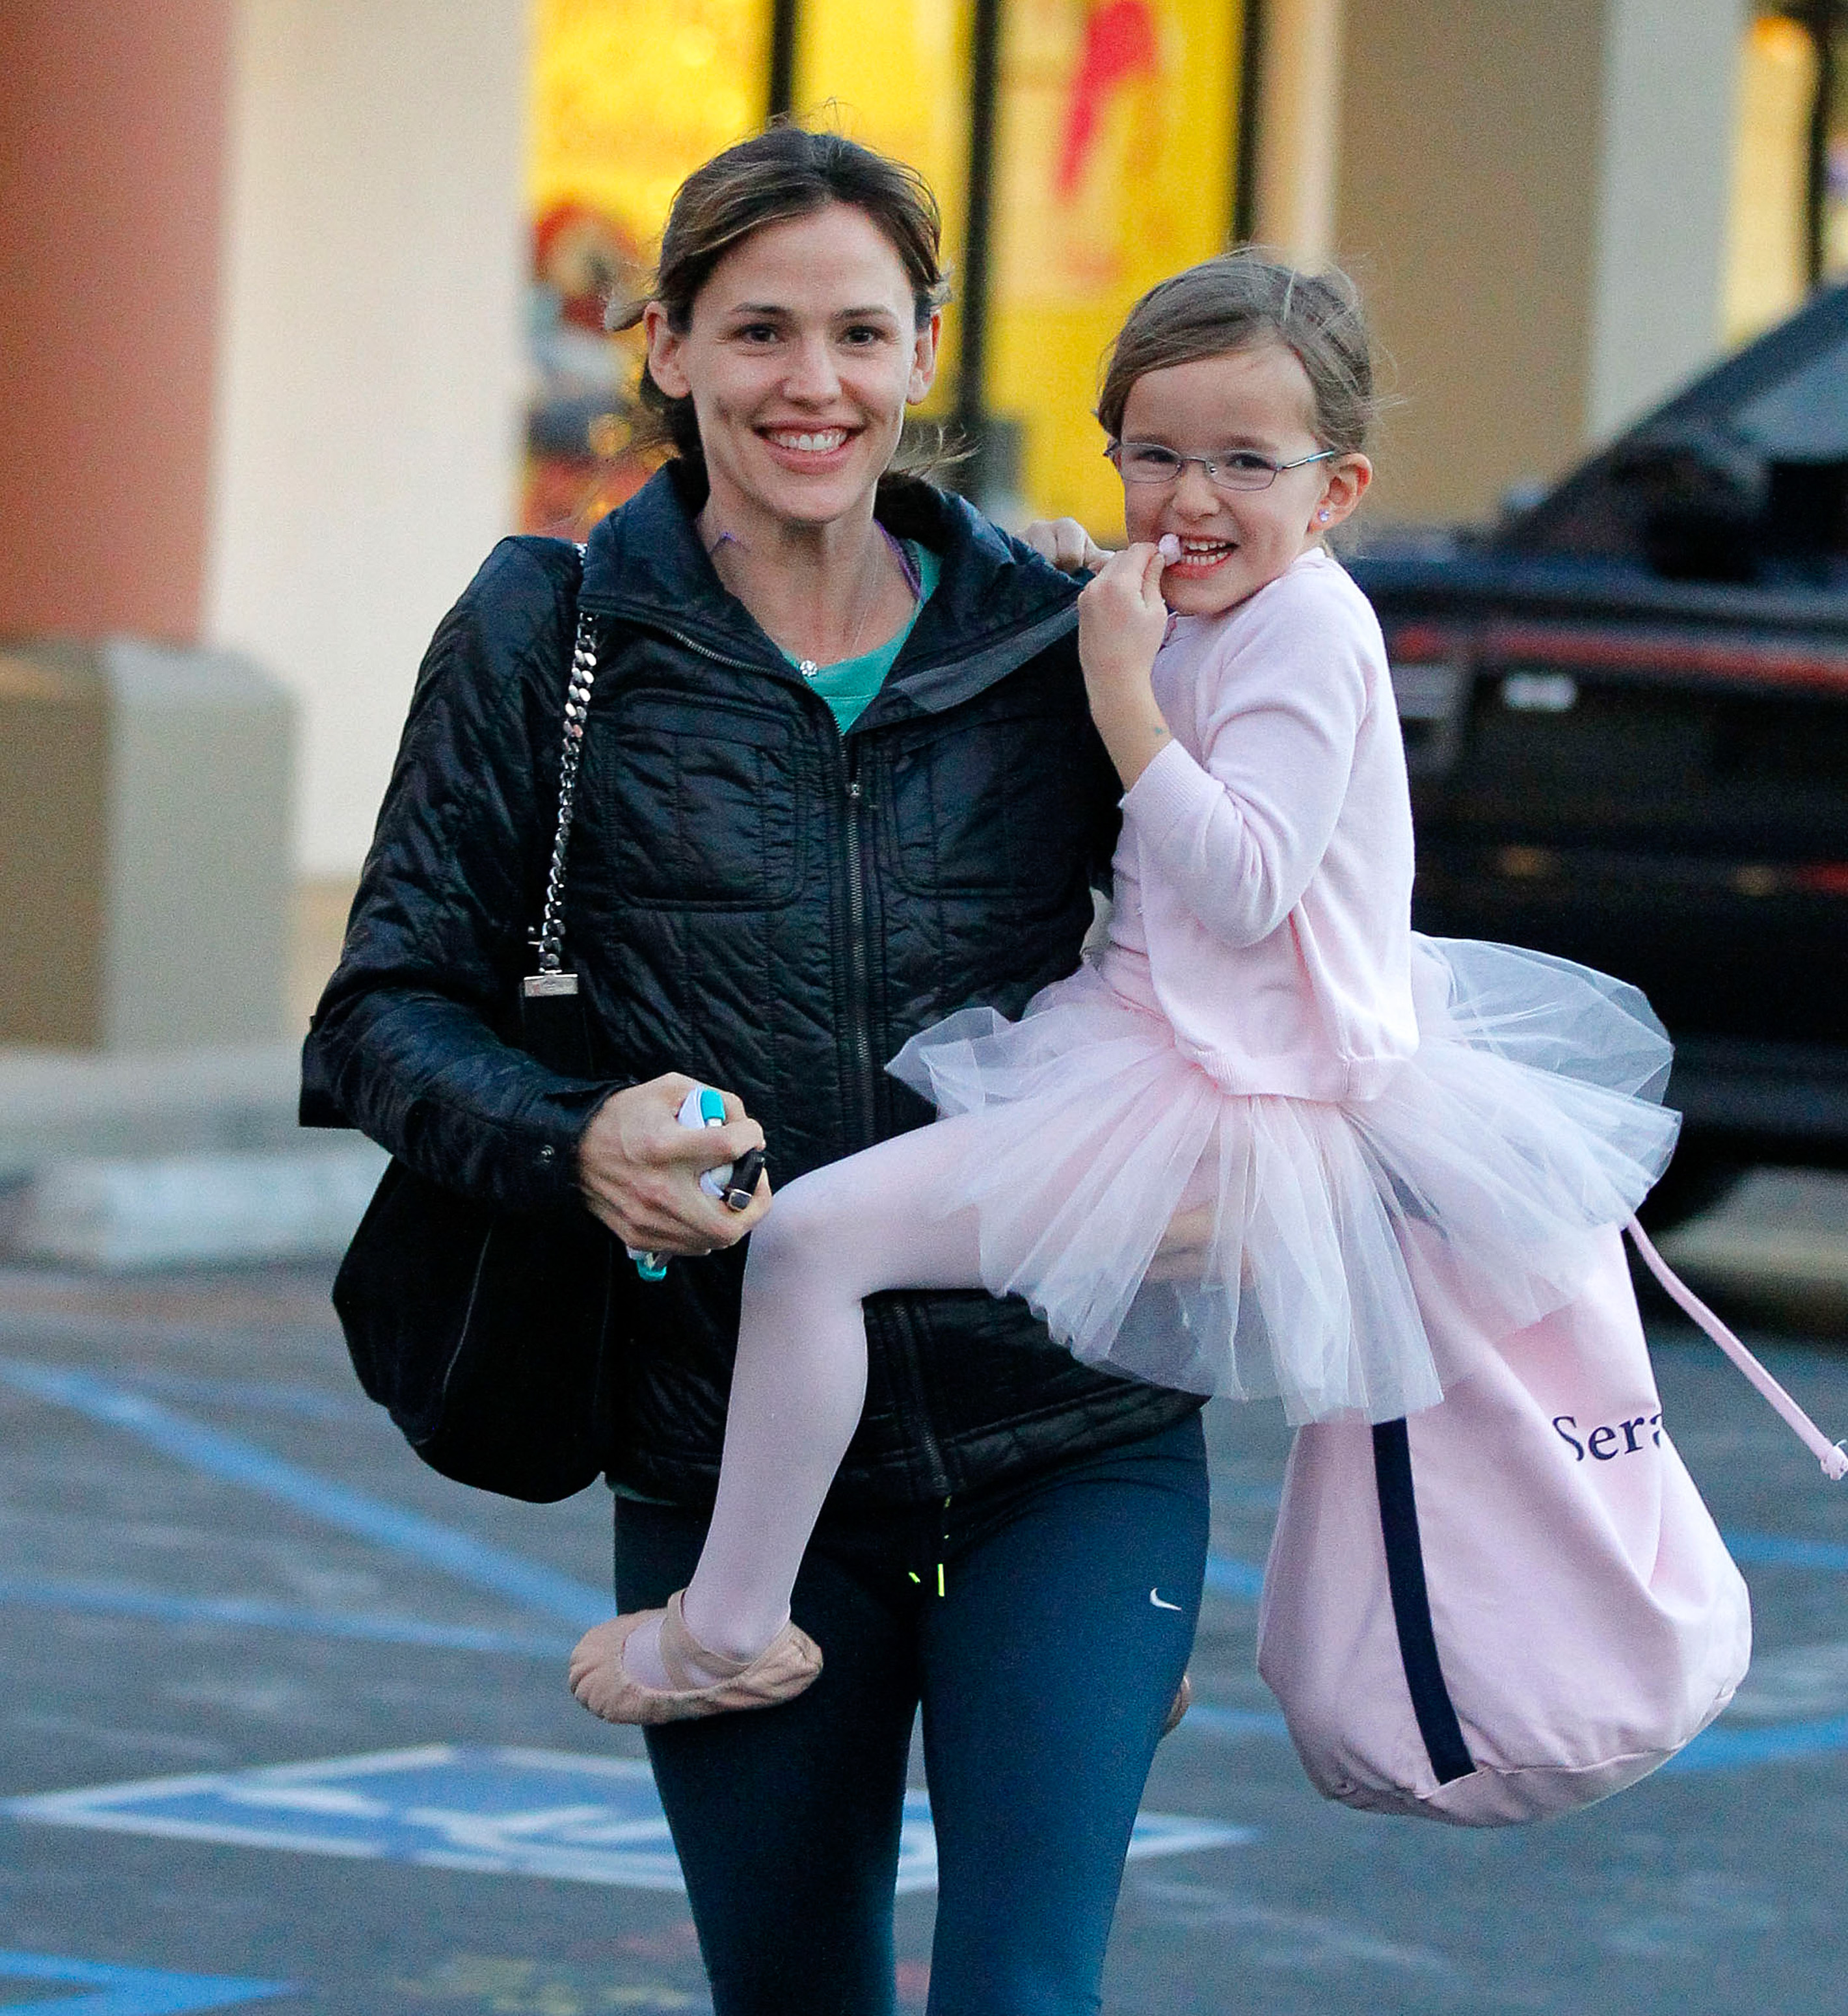 Jennifer Garner and Seraphina Affleck are seen, on December 13, 2013, in Los Angeles, California. | Source: Getty Images